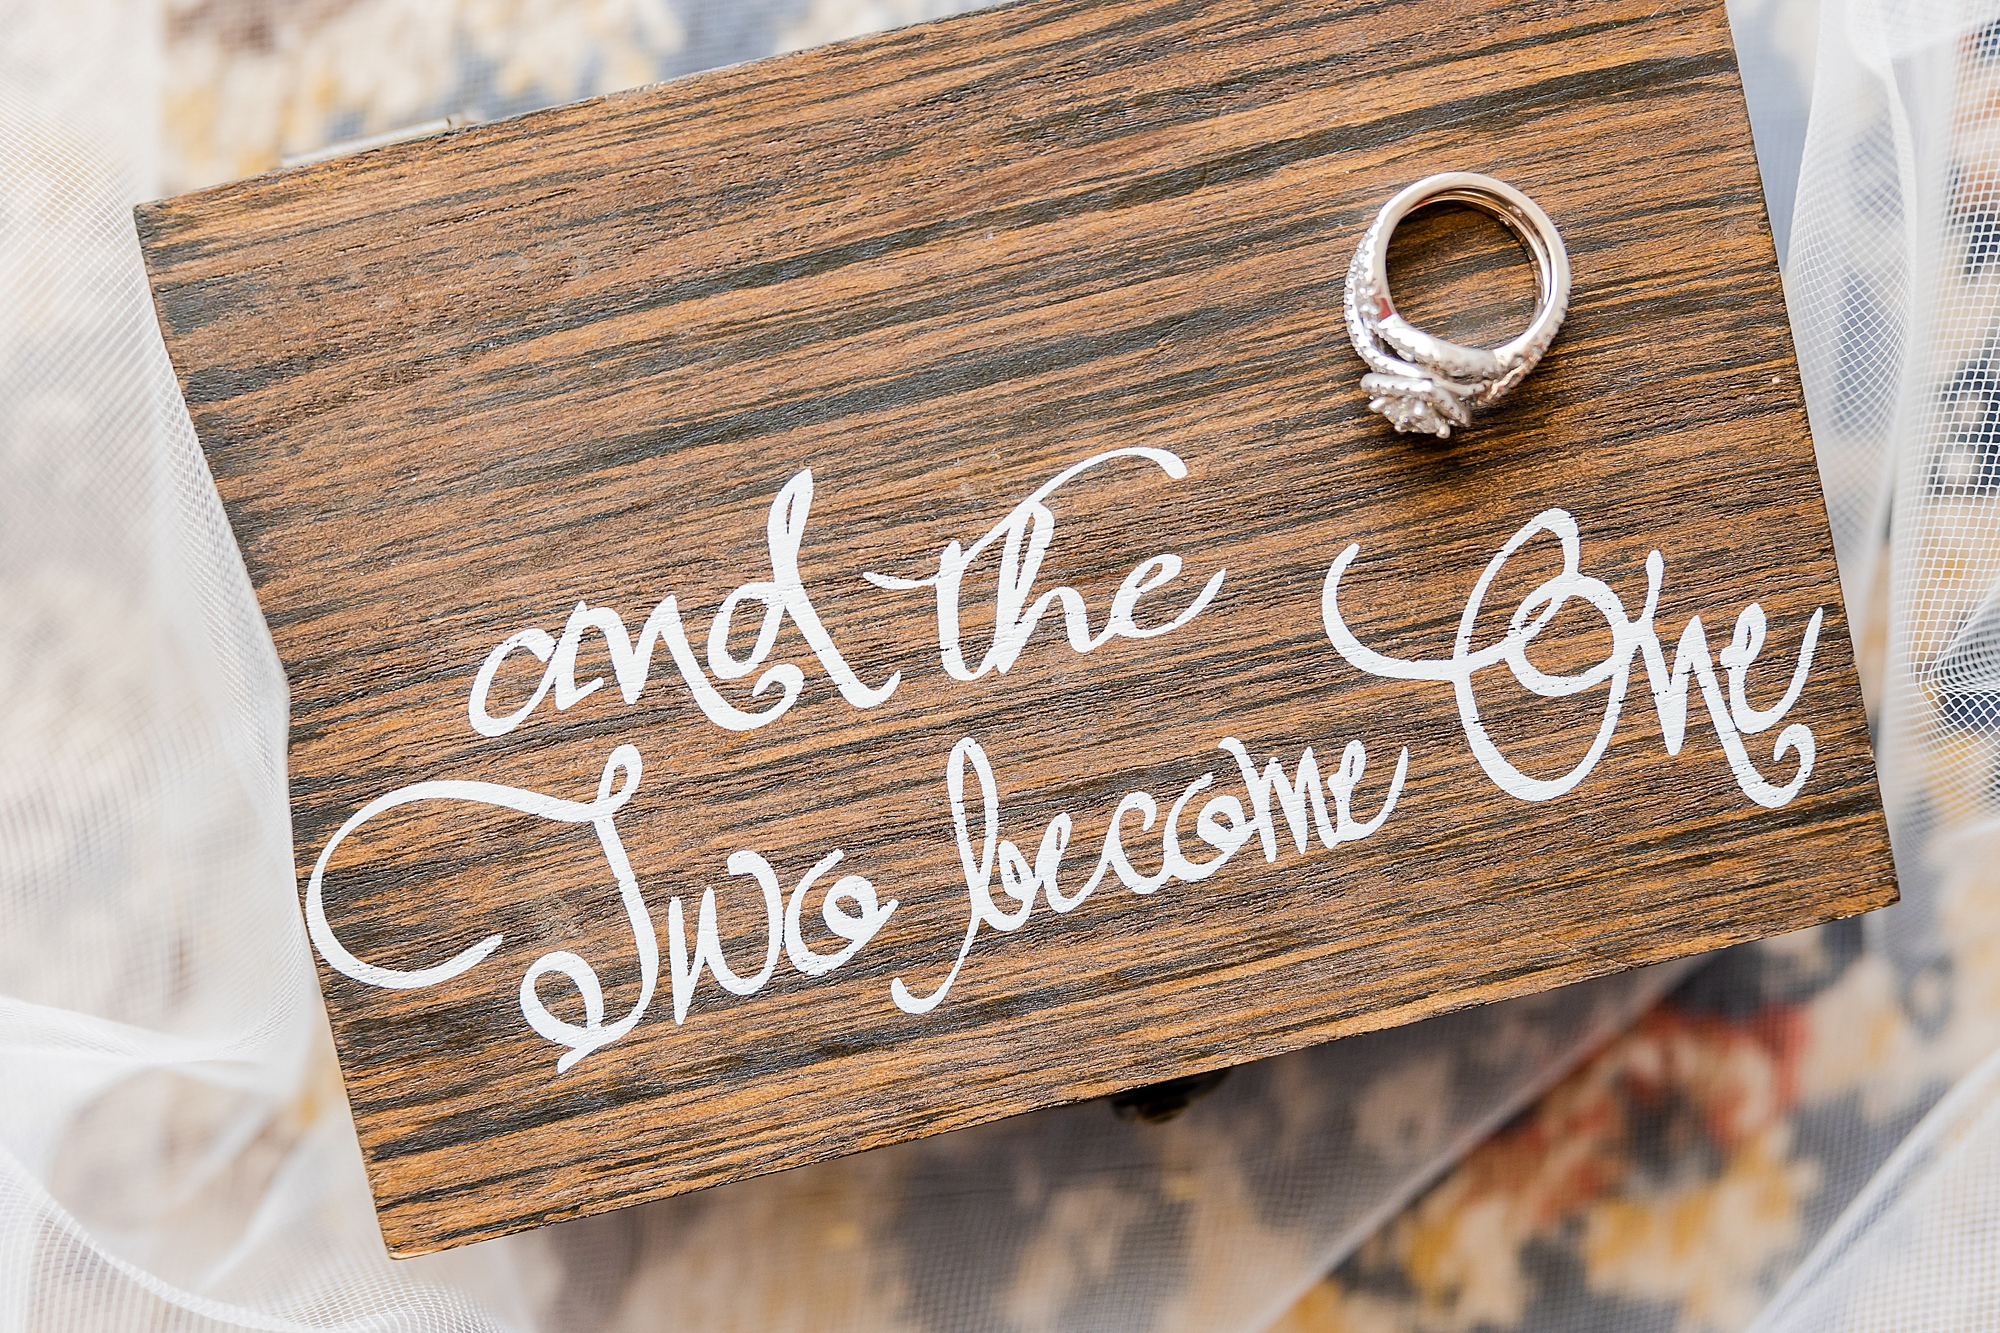 wedding rings rest on wooden sign before Charleston wedding